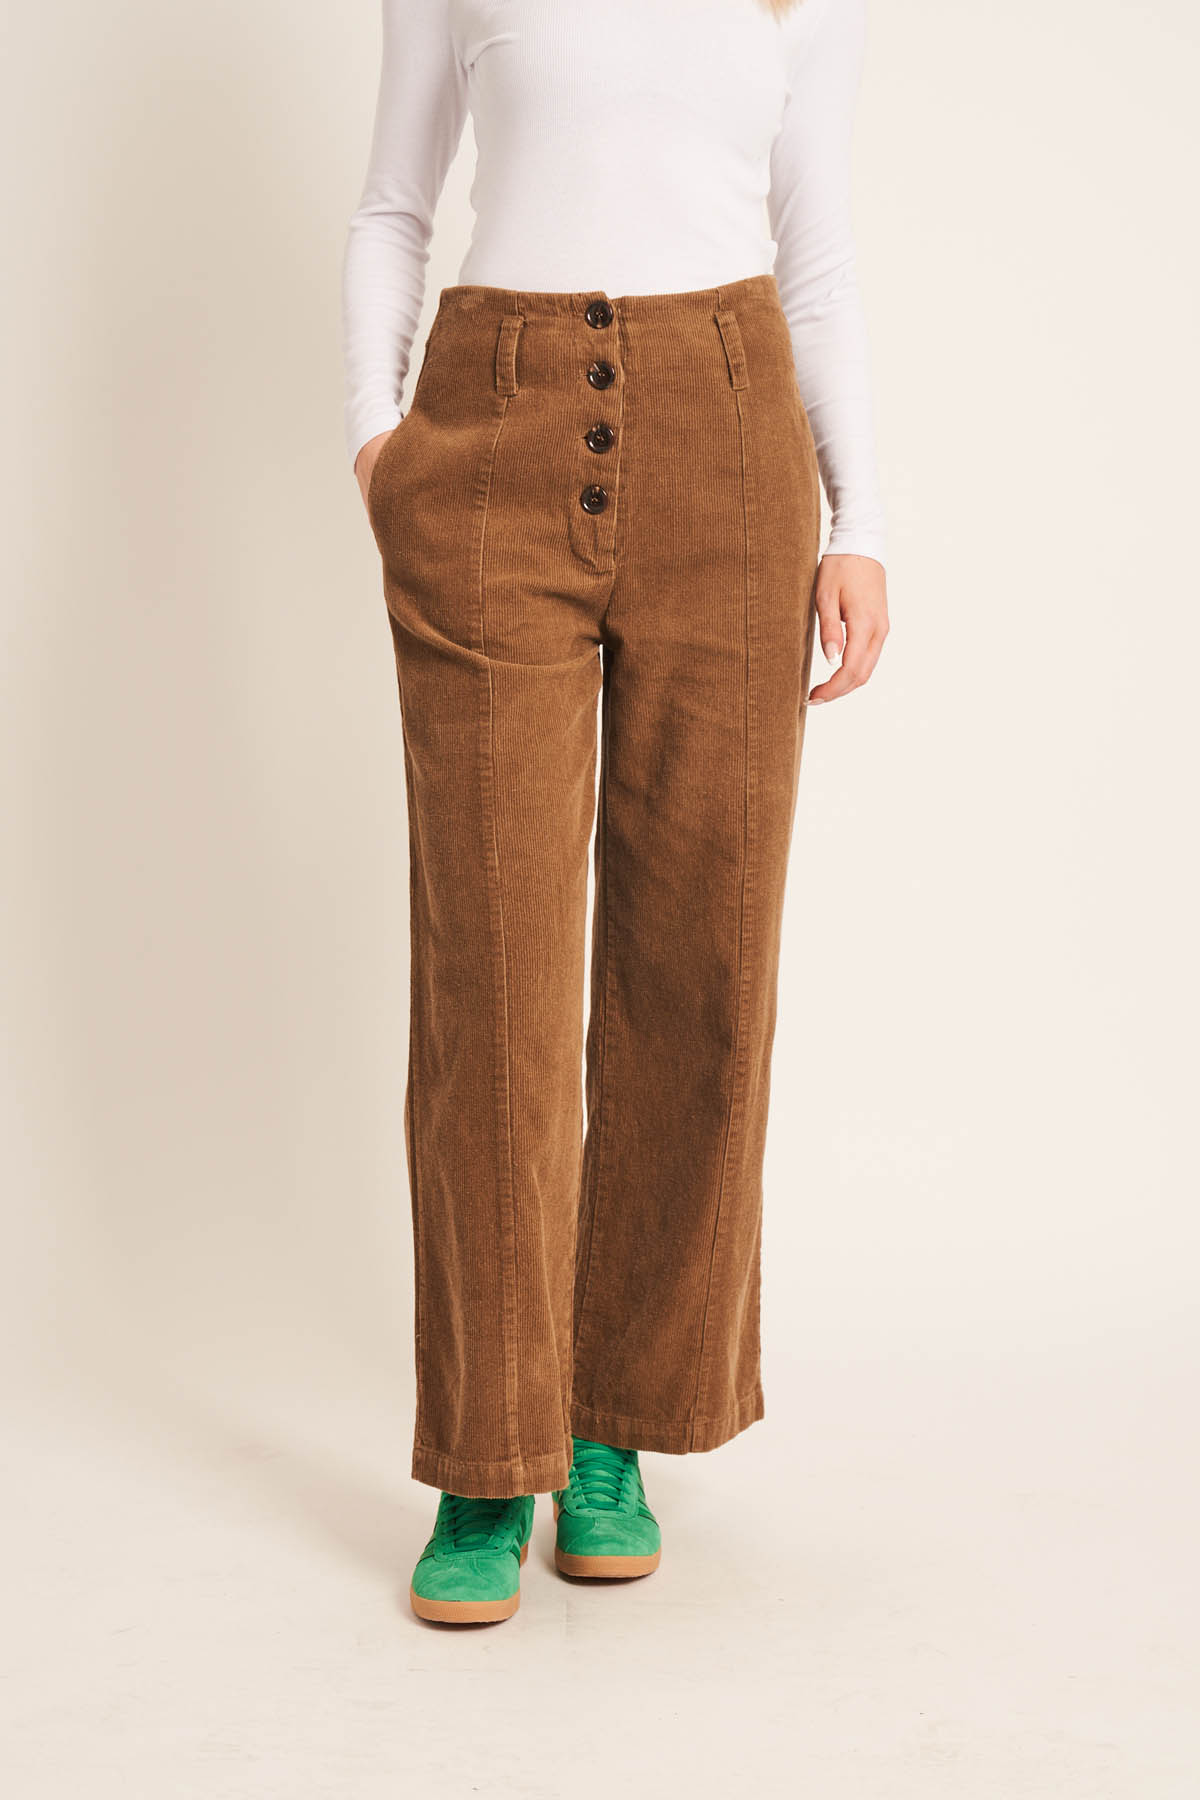 Iggy Corduroy Trousers  Näz  Sustainable Fashion Made in Europe